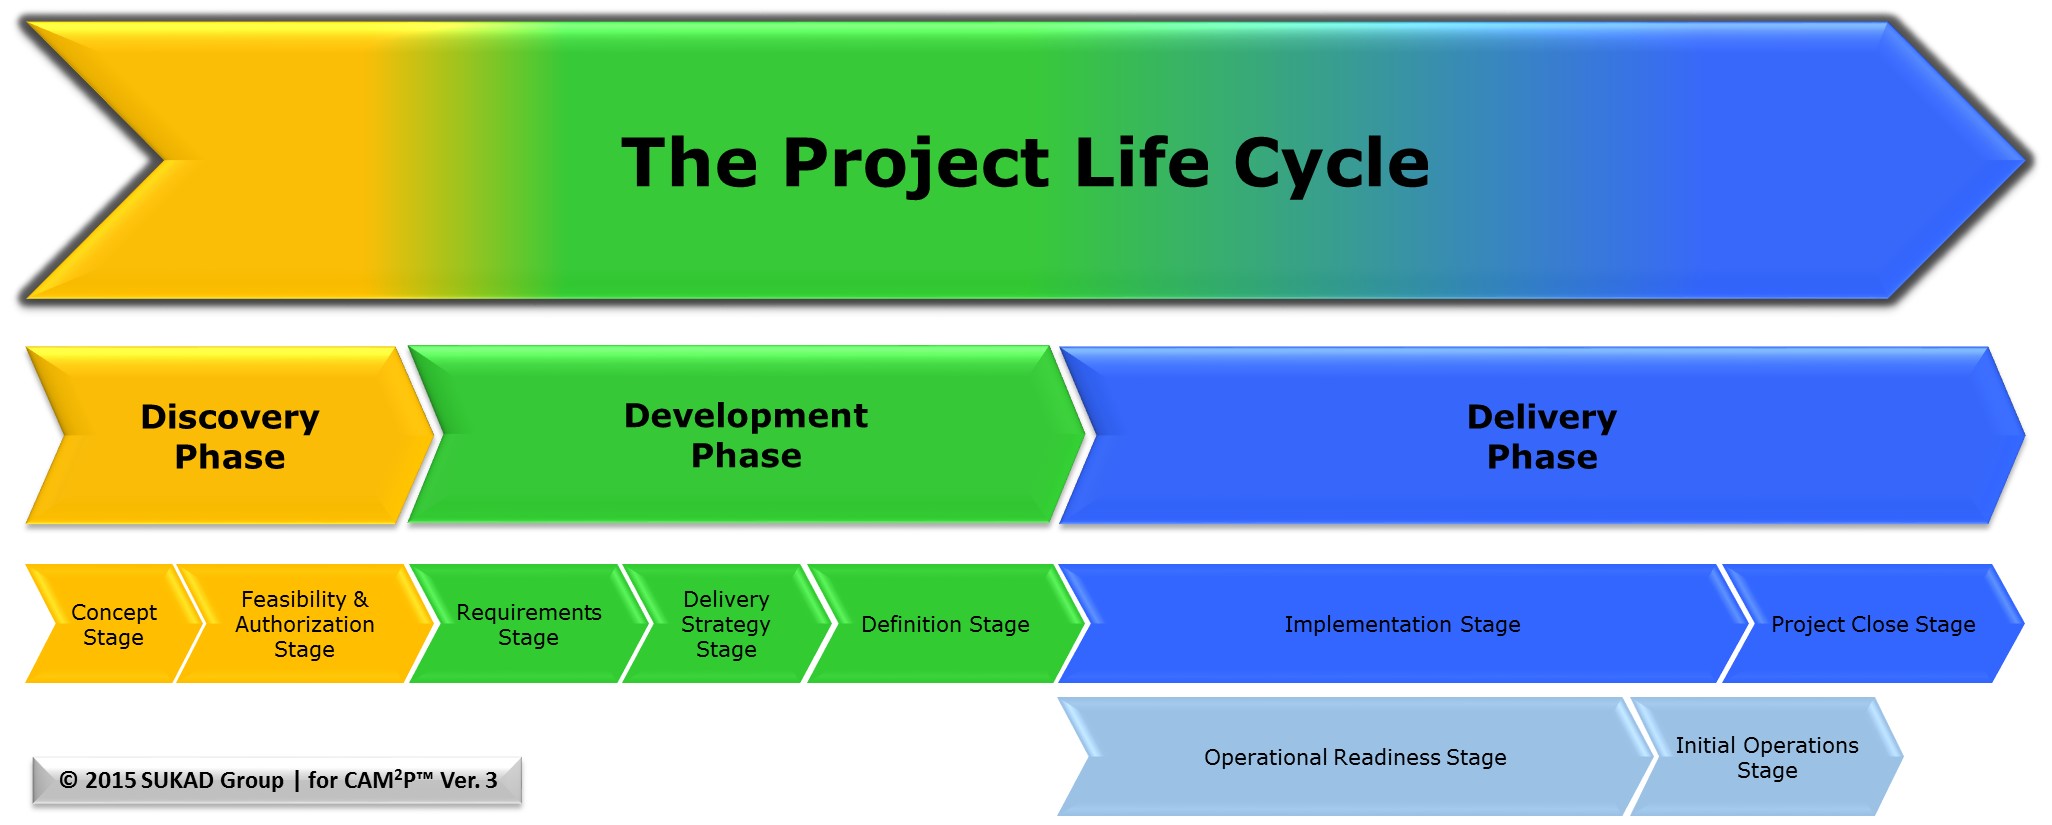 How to build universal methodology for managing projects?